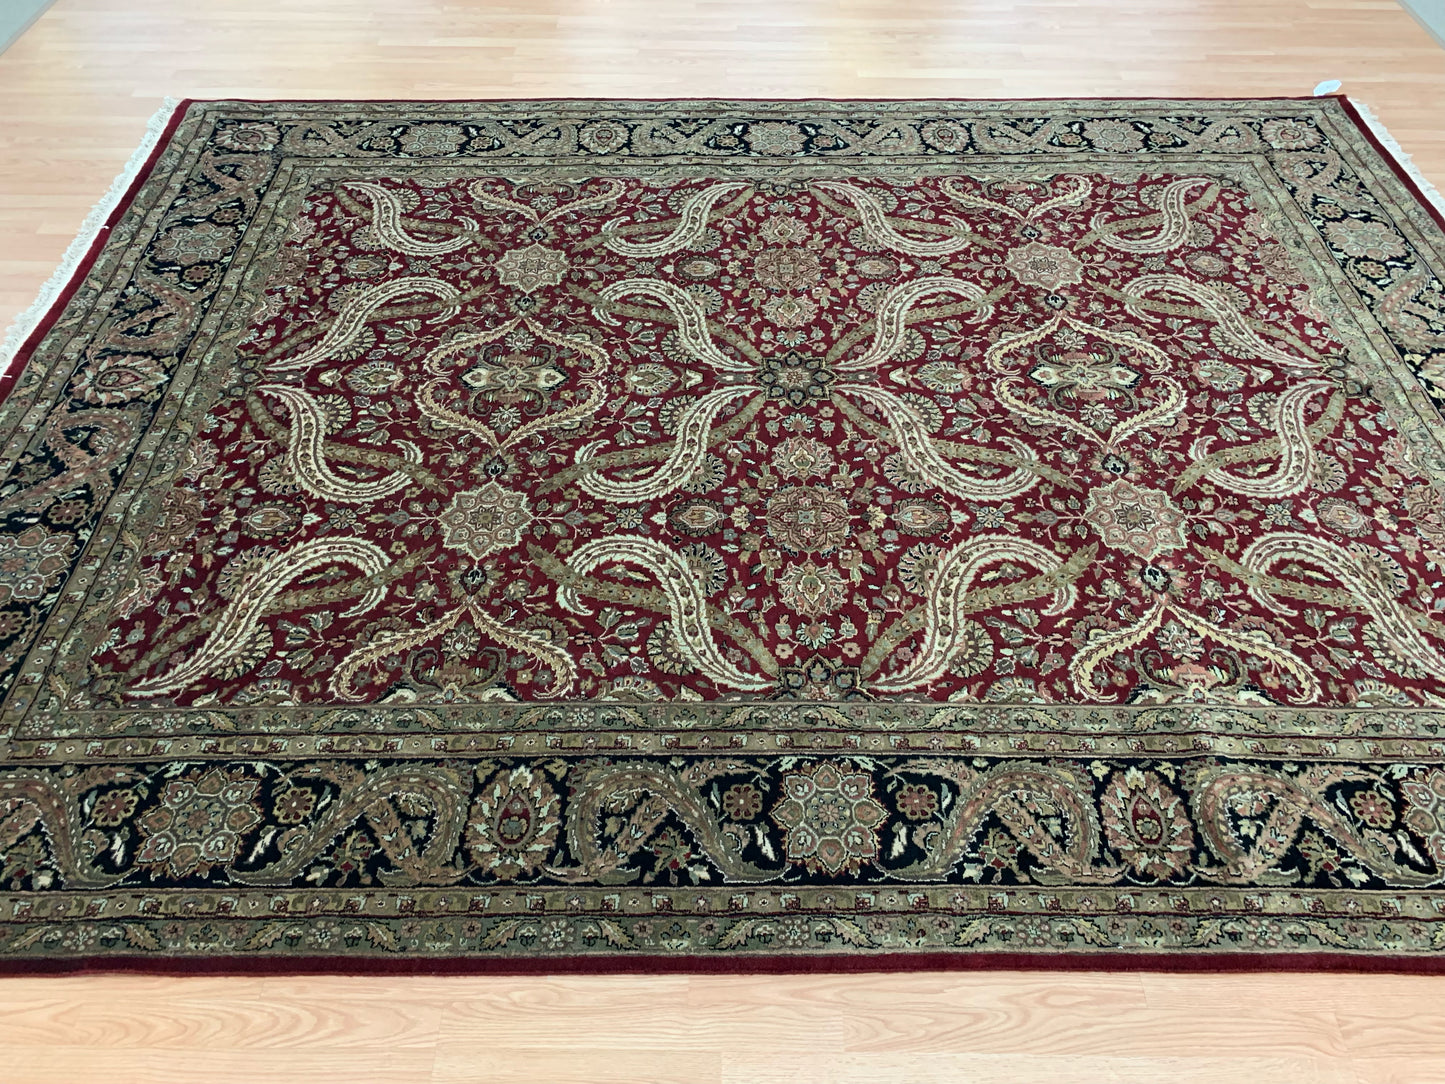 Hand-Knotted Wool Brocade Red/Black Rug (8'11"x11'9")